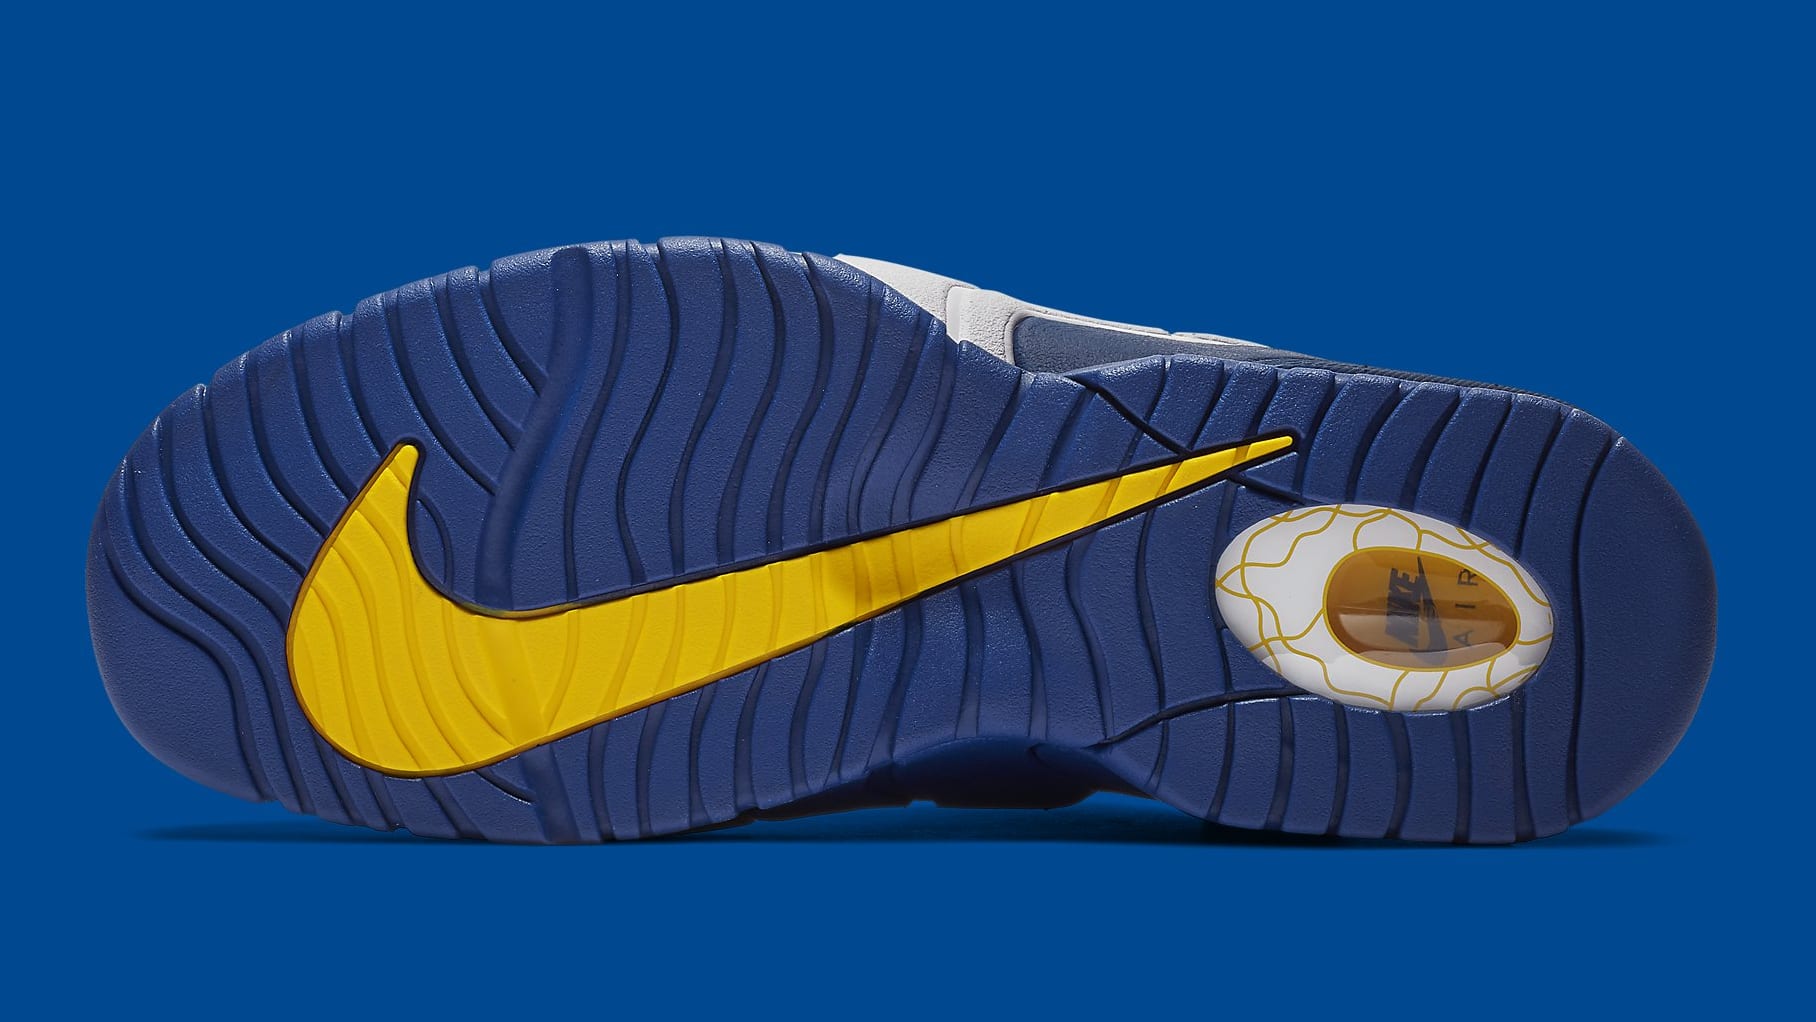 Nike Air Max Penny 1 Warriors Release Date 685153-401 Sole